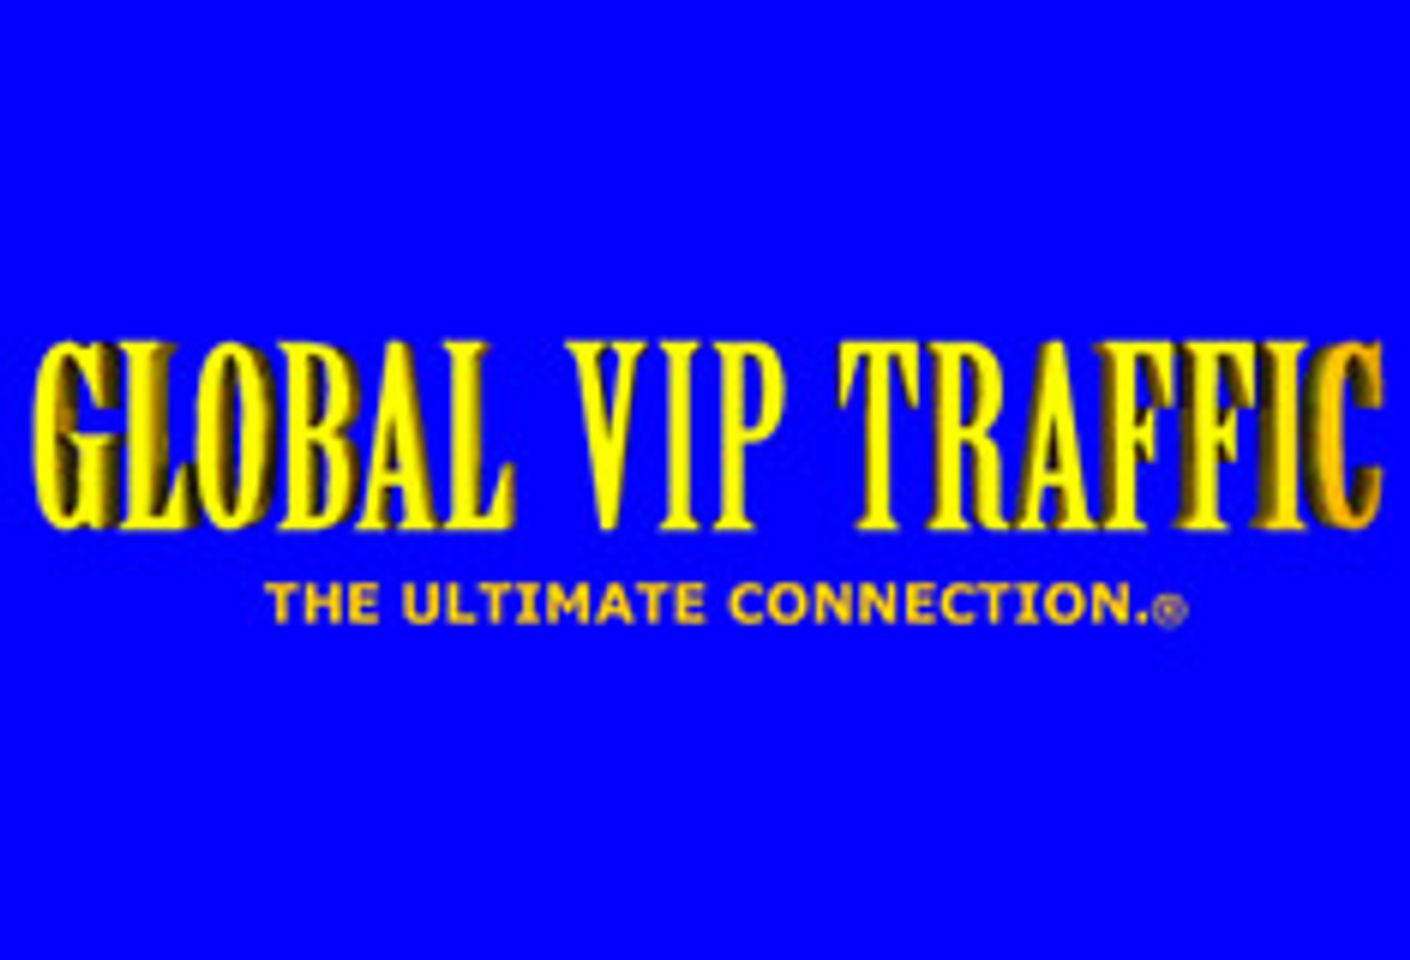 Global VIP Traffic Launches Adult Advertising Sister Site